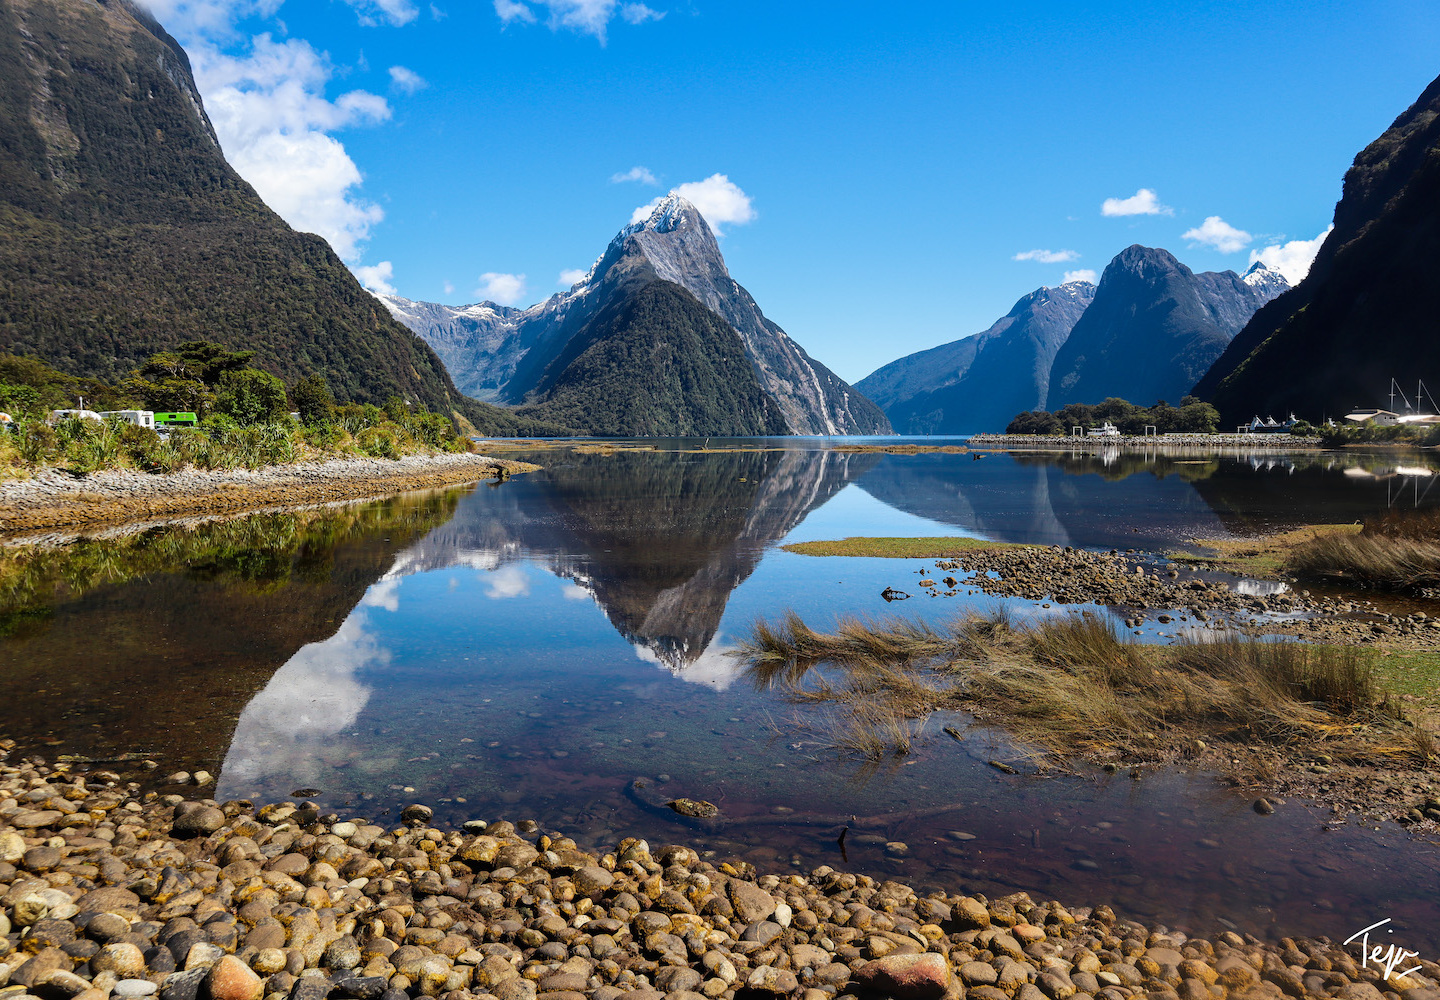 Our Epic Milford Sound Cruise & Kayak Experience